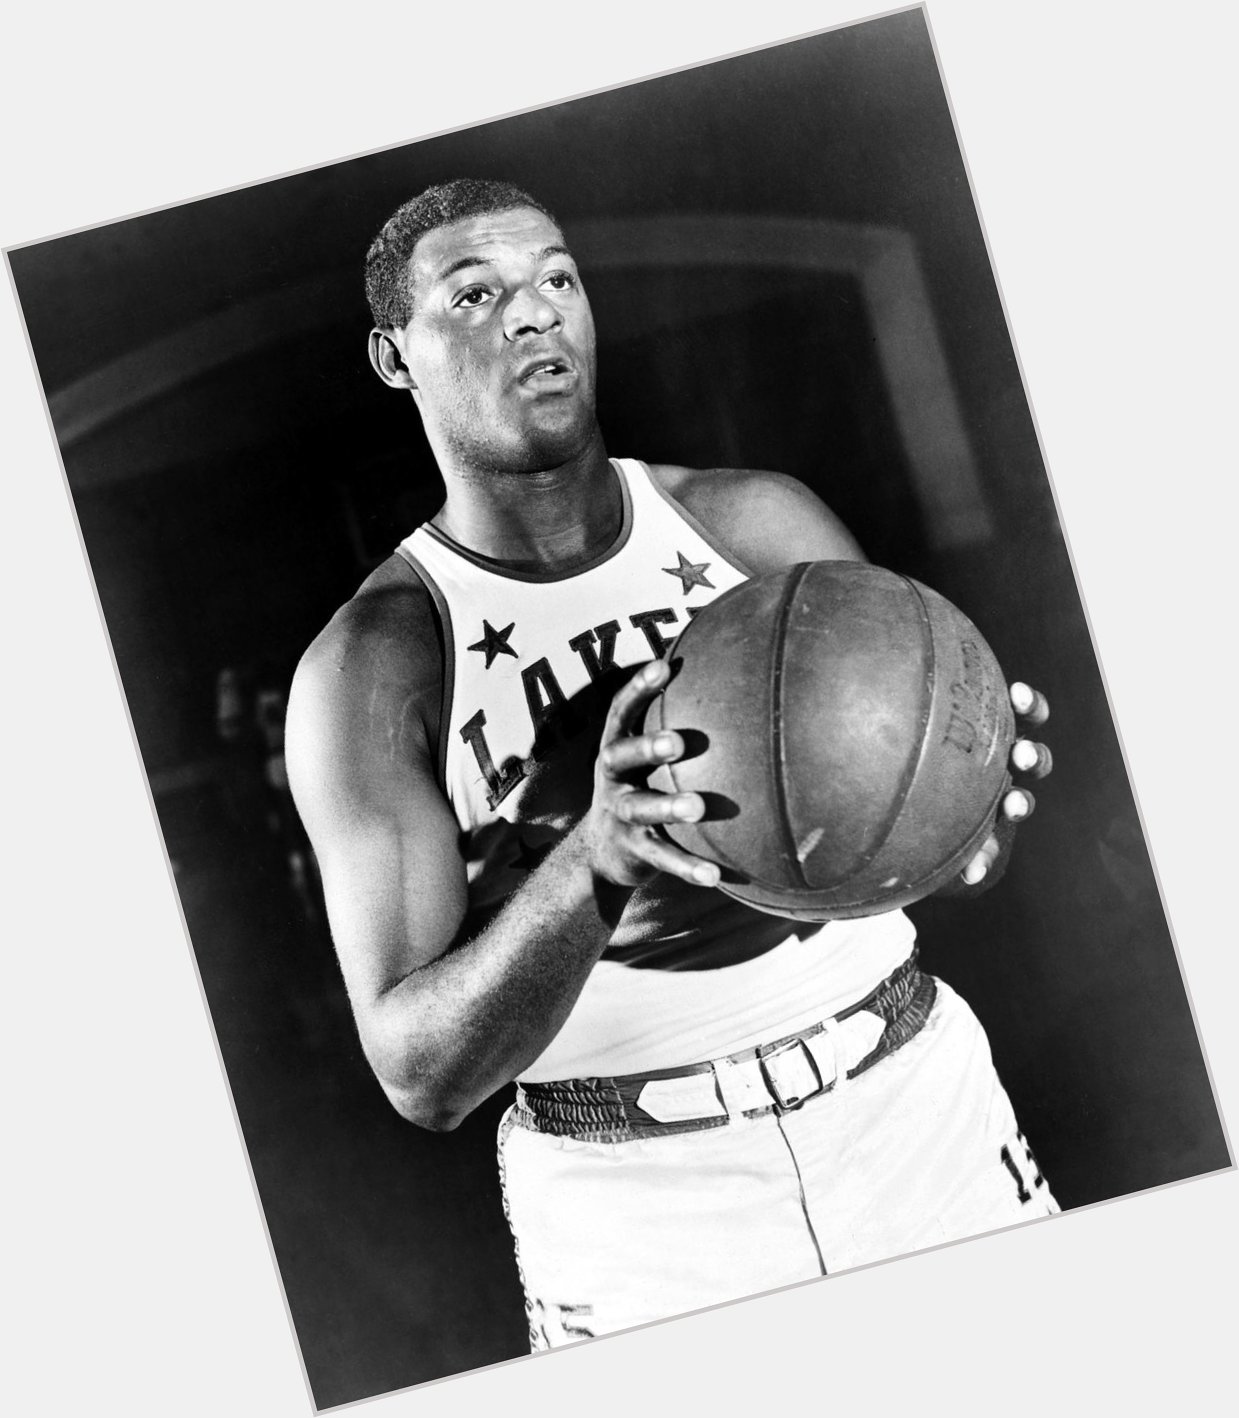 Happy Birthday, Elgin Baylor!

Celebrate w/ look back at his Hall of Fame career:  